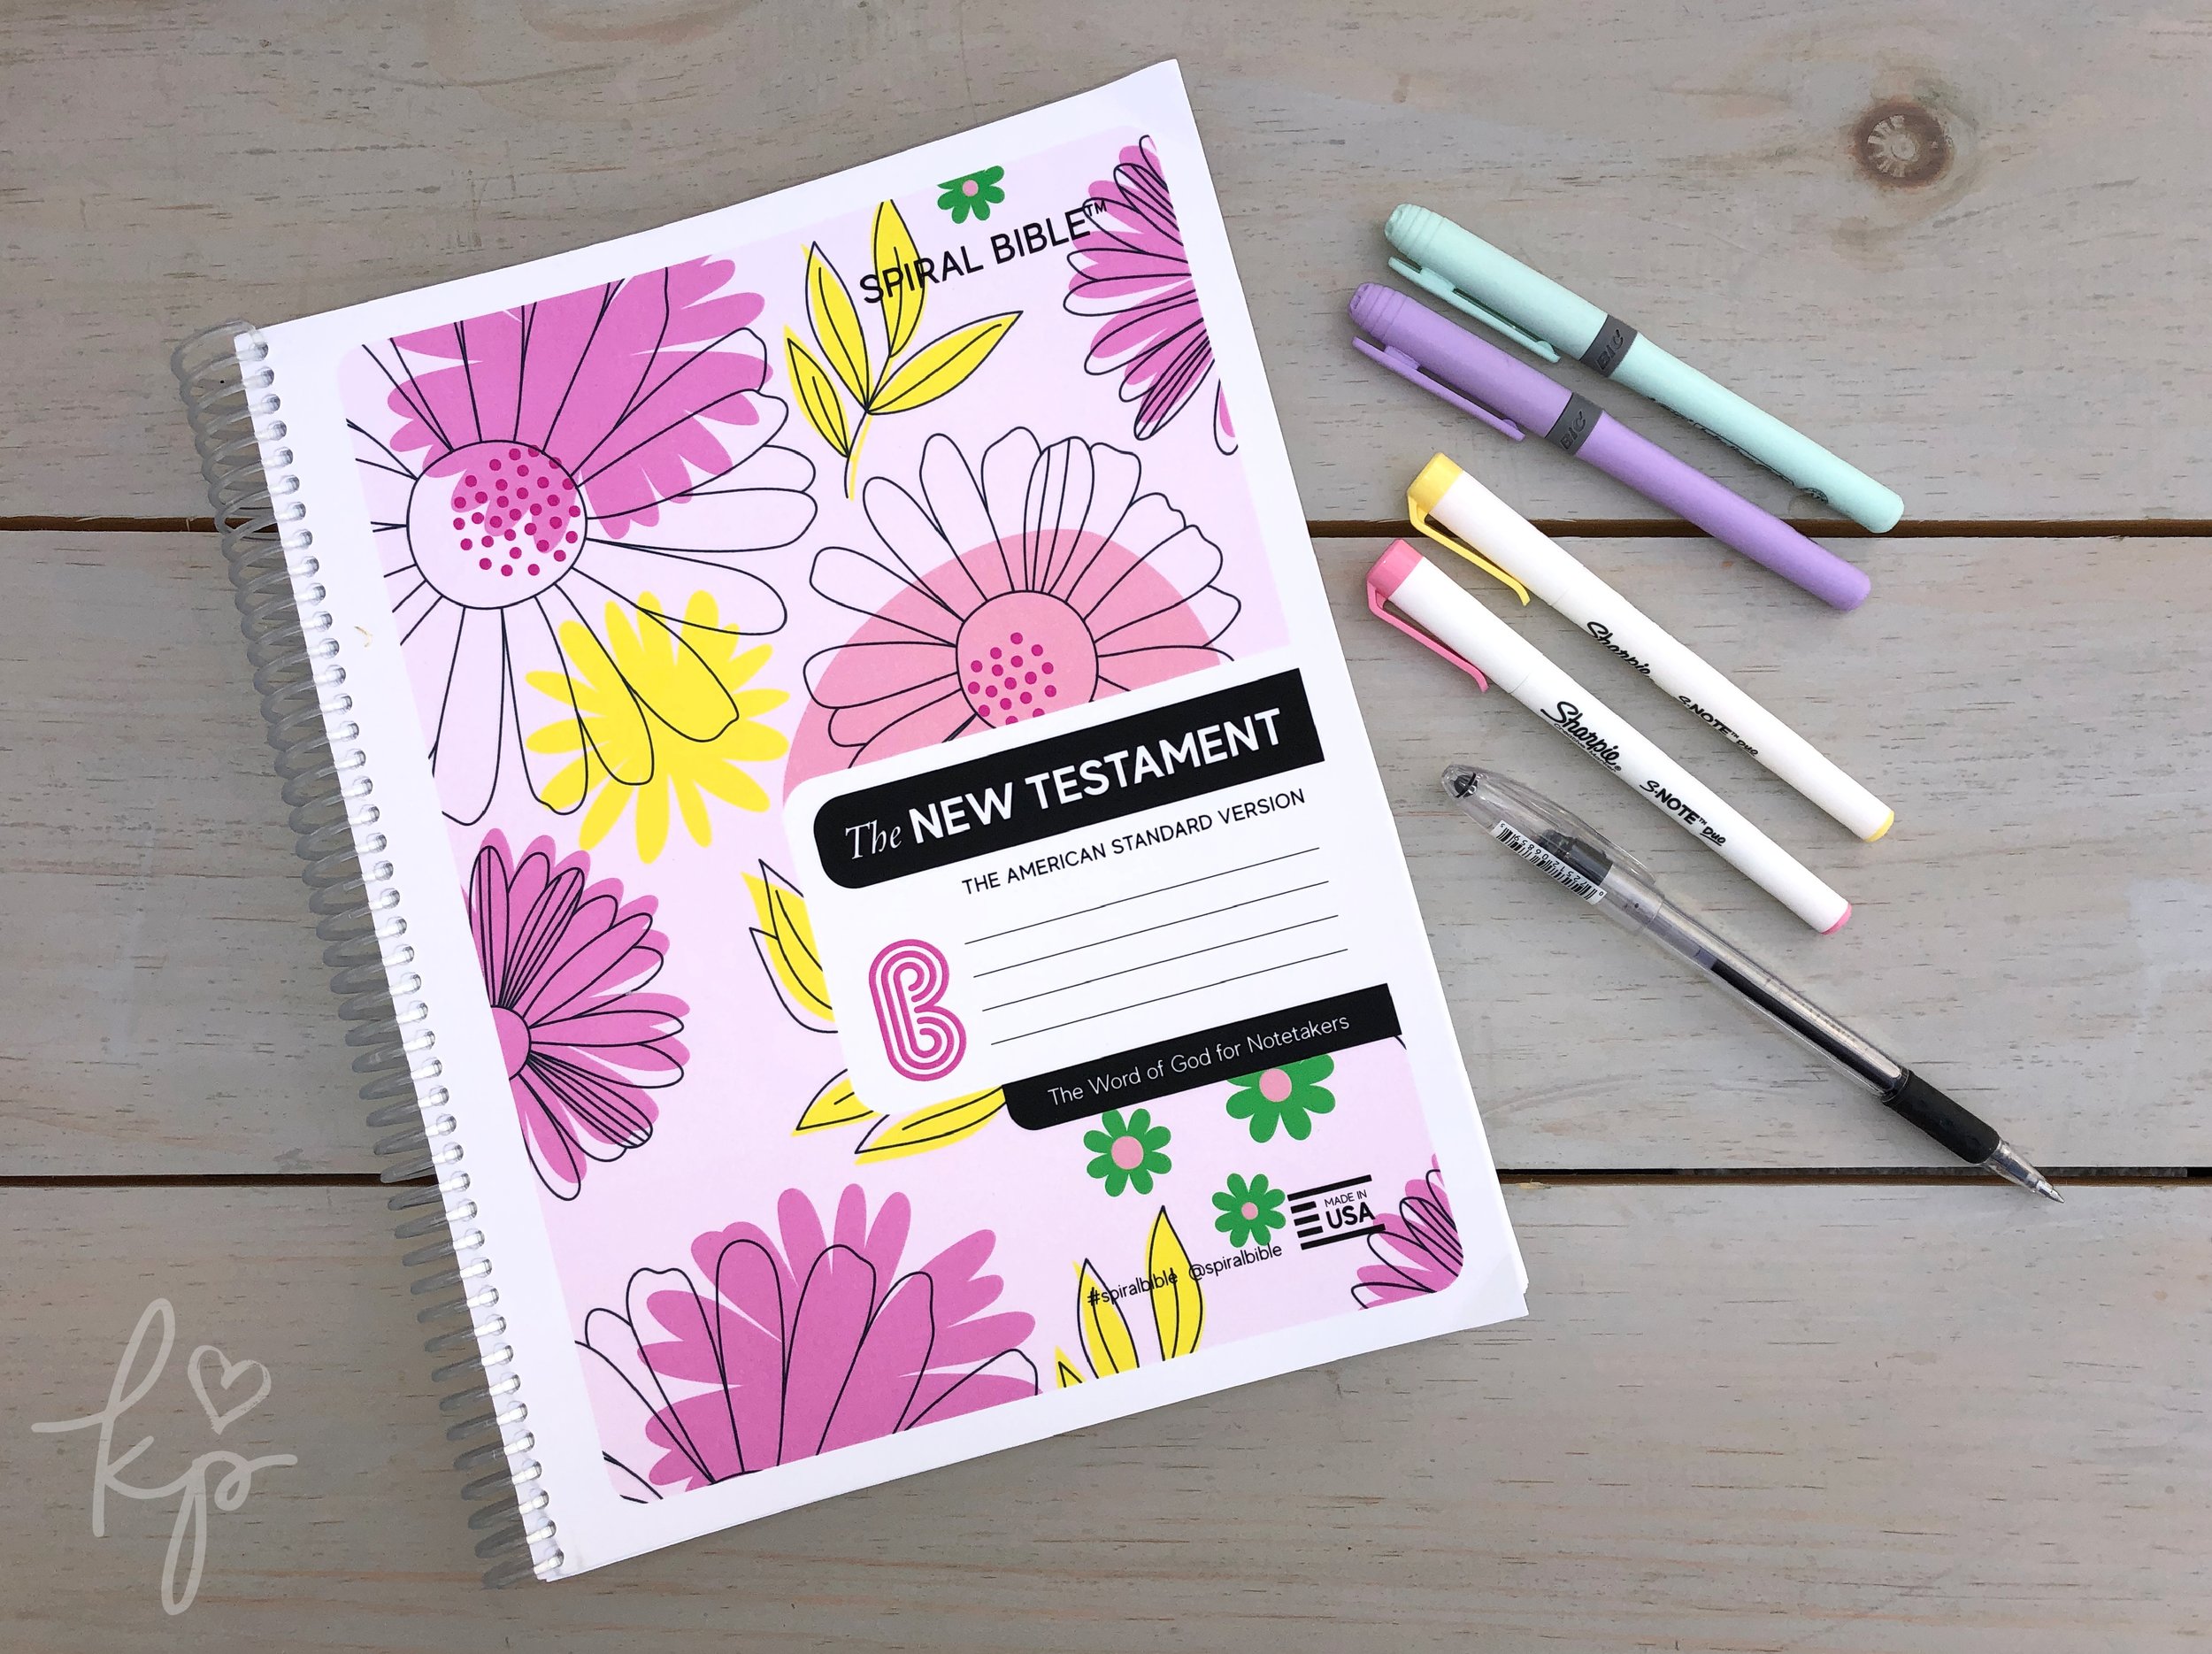 How I Started Bible Journaling – Kountingsheep